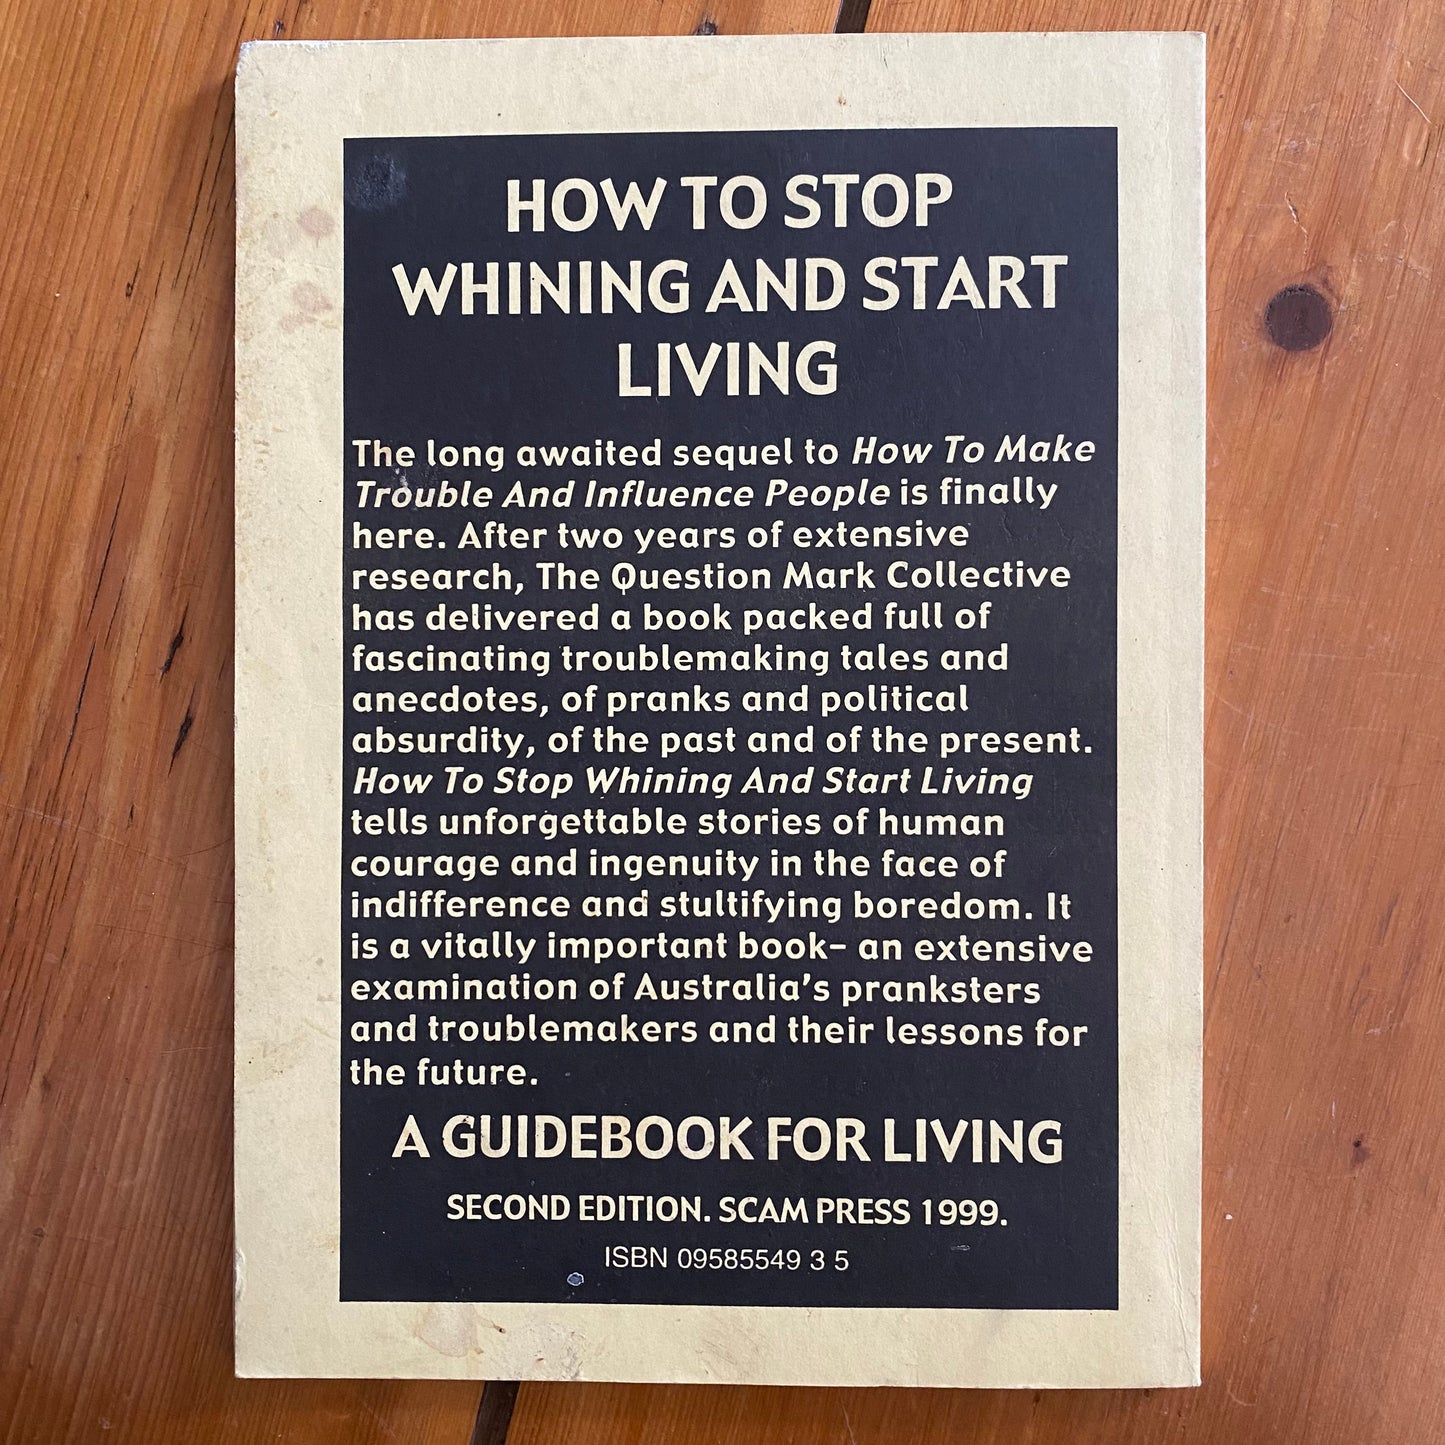 How to Make Trouble and Influence People #2 - How To Stop Whining And Start Living